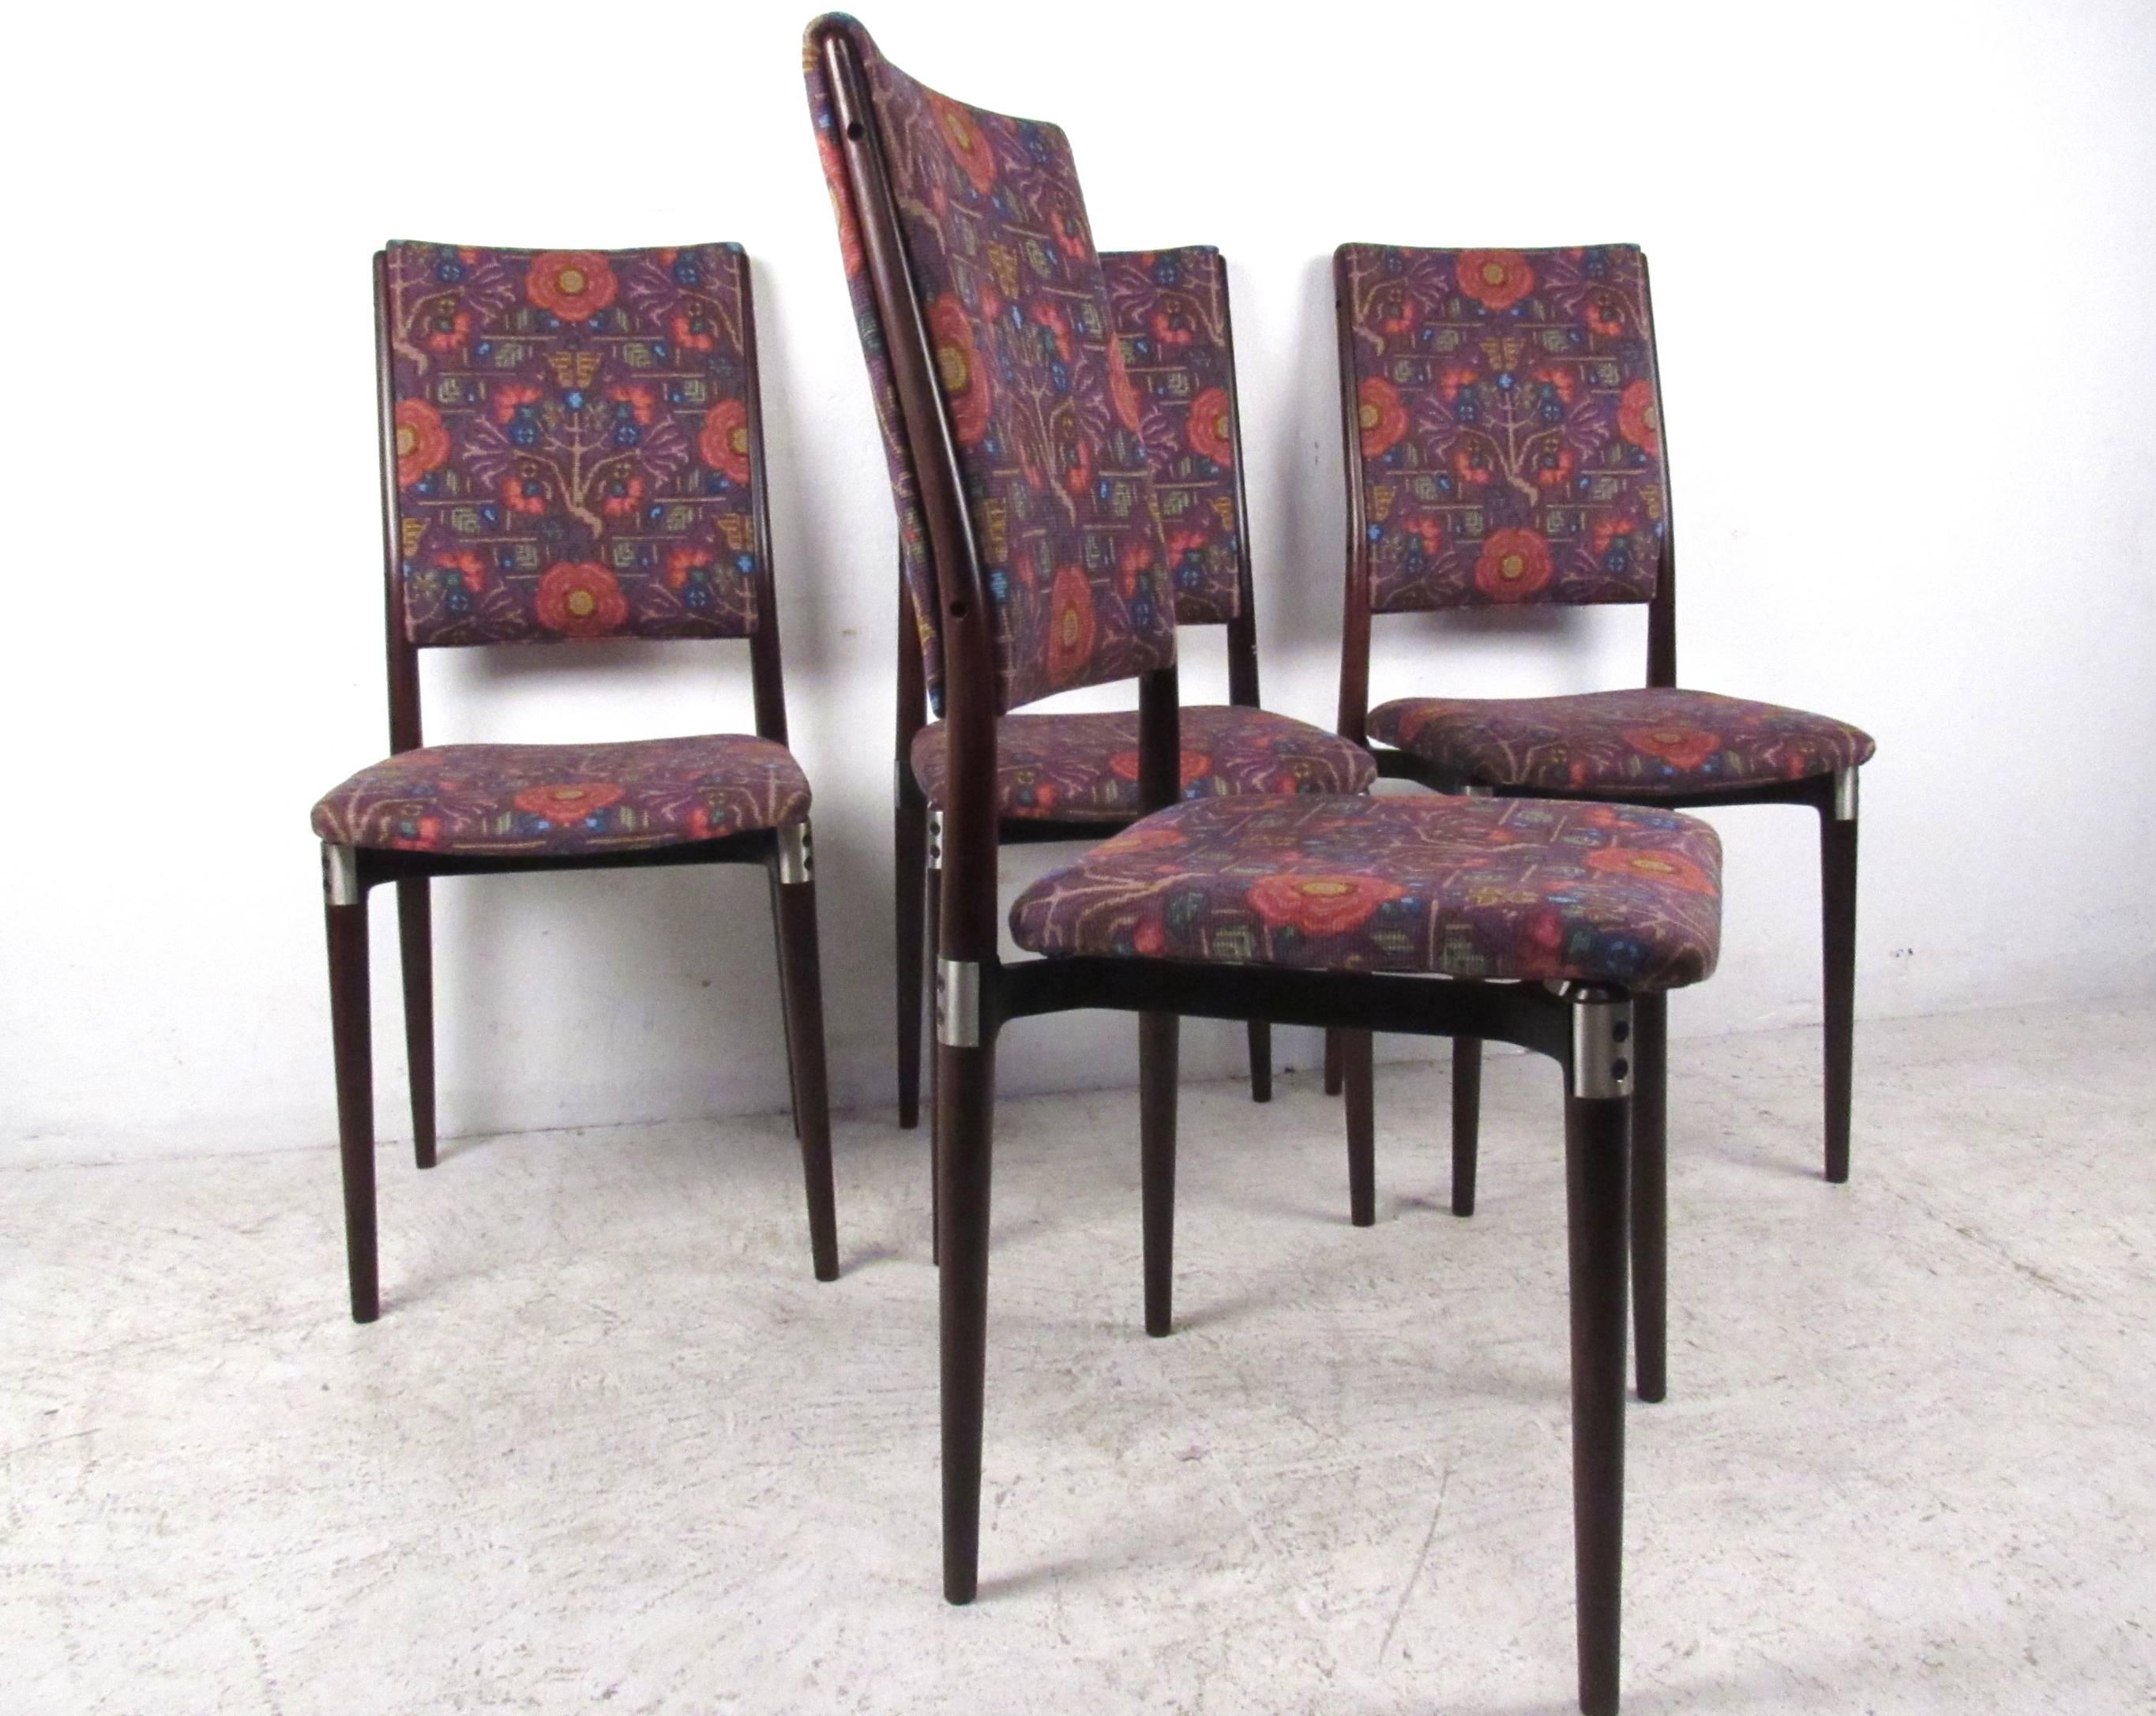 This unique set of high back dining chairs features a wonderful combination of stylish designer upholstery and unique wooden frames. Tapered legs, aluminium trim and the vintage fabric make these an eye-catching addition to any dining table or